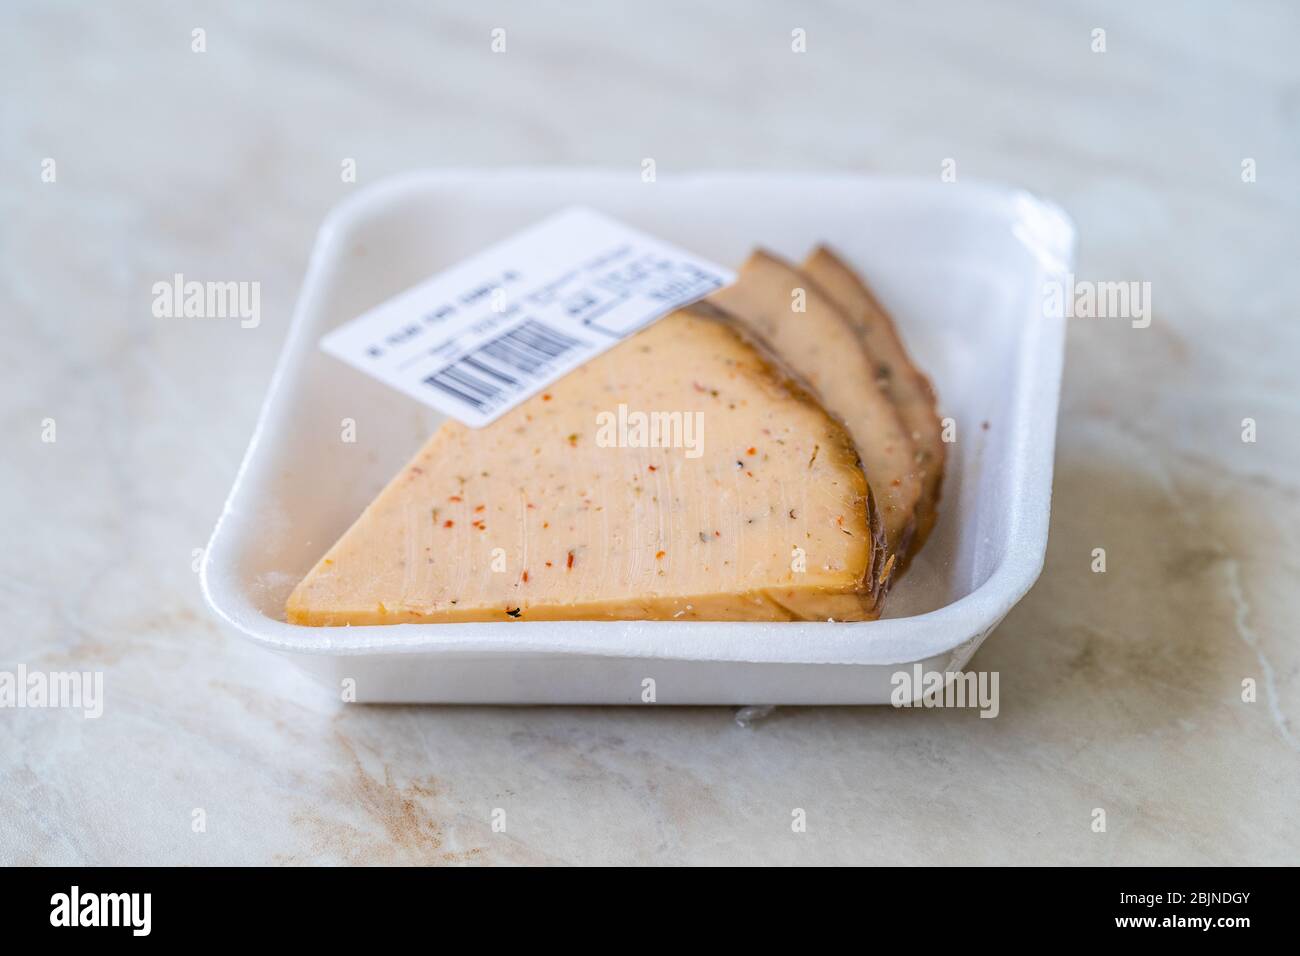 Spicy Circassian Triangle Smoked Cheese Slices on Dark Wooden Plate with Spices for Sale in Plastic Container Package Box. Ready to Eat. Stock Photo